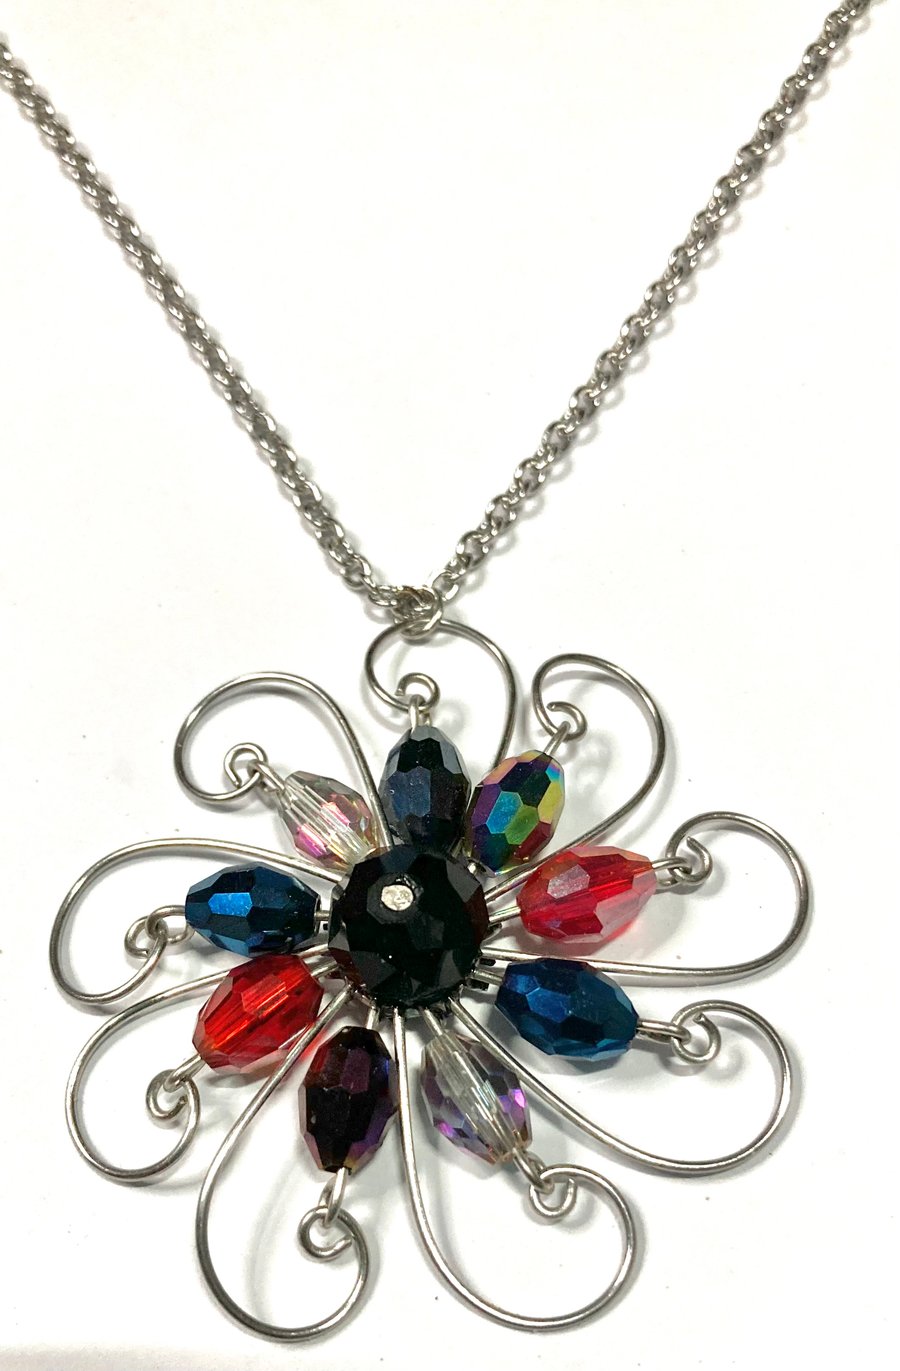 Beaded flower pendant necklace with stainless steel chain, choose length. 